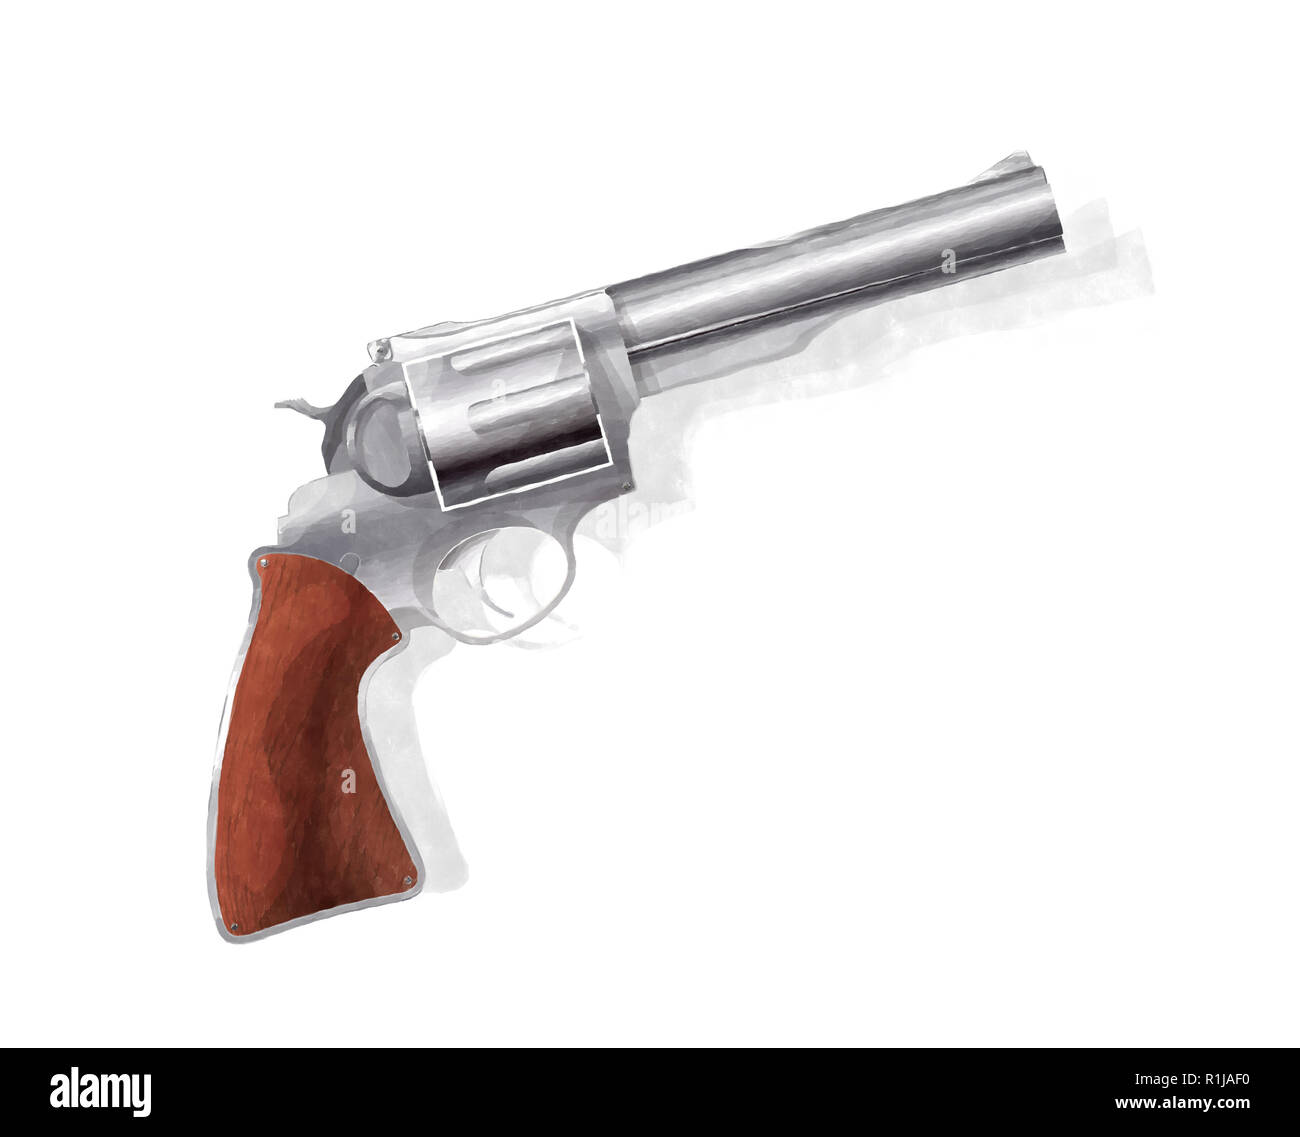 Wood Handled Revolver 38 Caliber Pistol Loaded Laying With Bulli Stock  Photo by ©cboswell 23904687